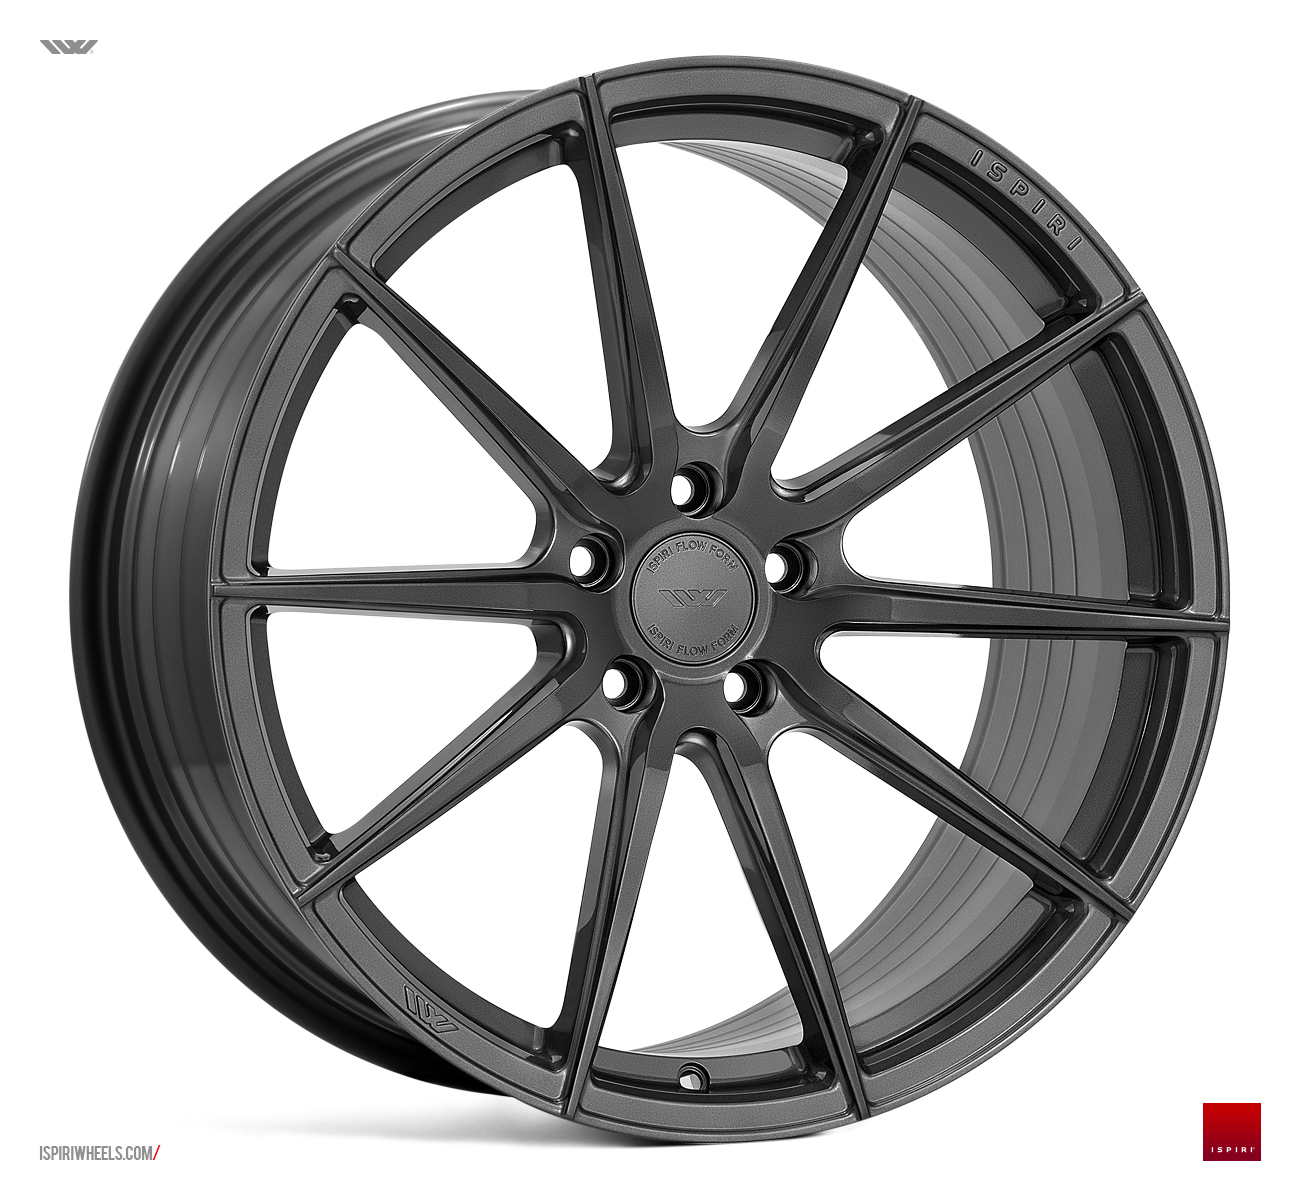 NEW 20  ISPIRI FFR1 MULTI SPOKE ALLOY WHEELS IN CARBON GRAPHITE  DEEPER CONCAVE REARS   VARIOUS FITMENTS AVAILABLE